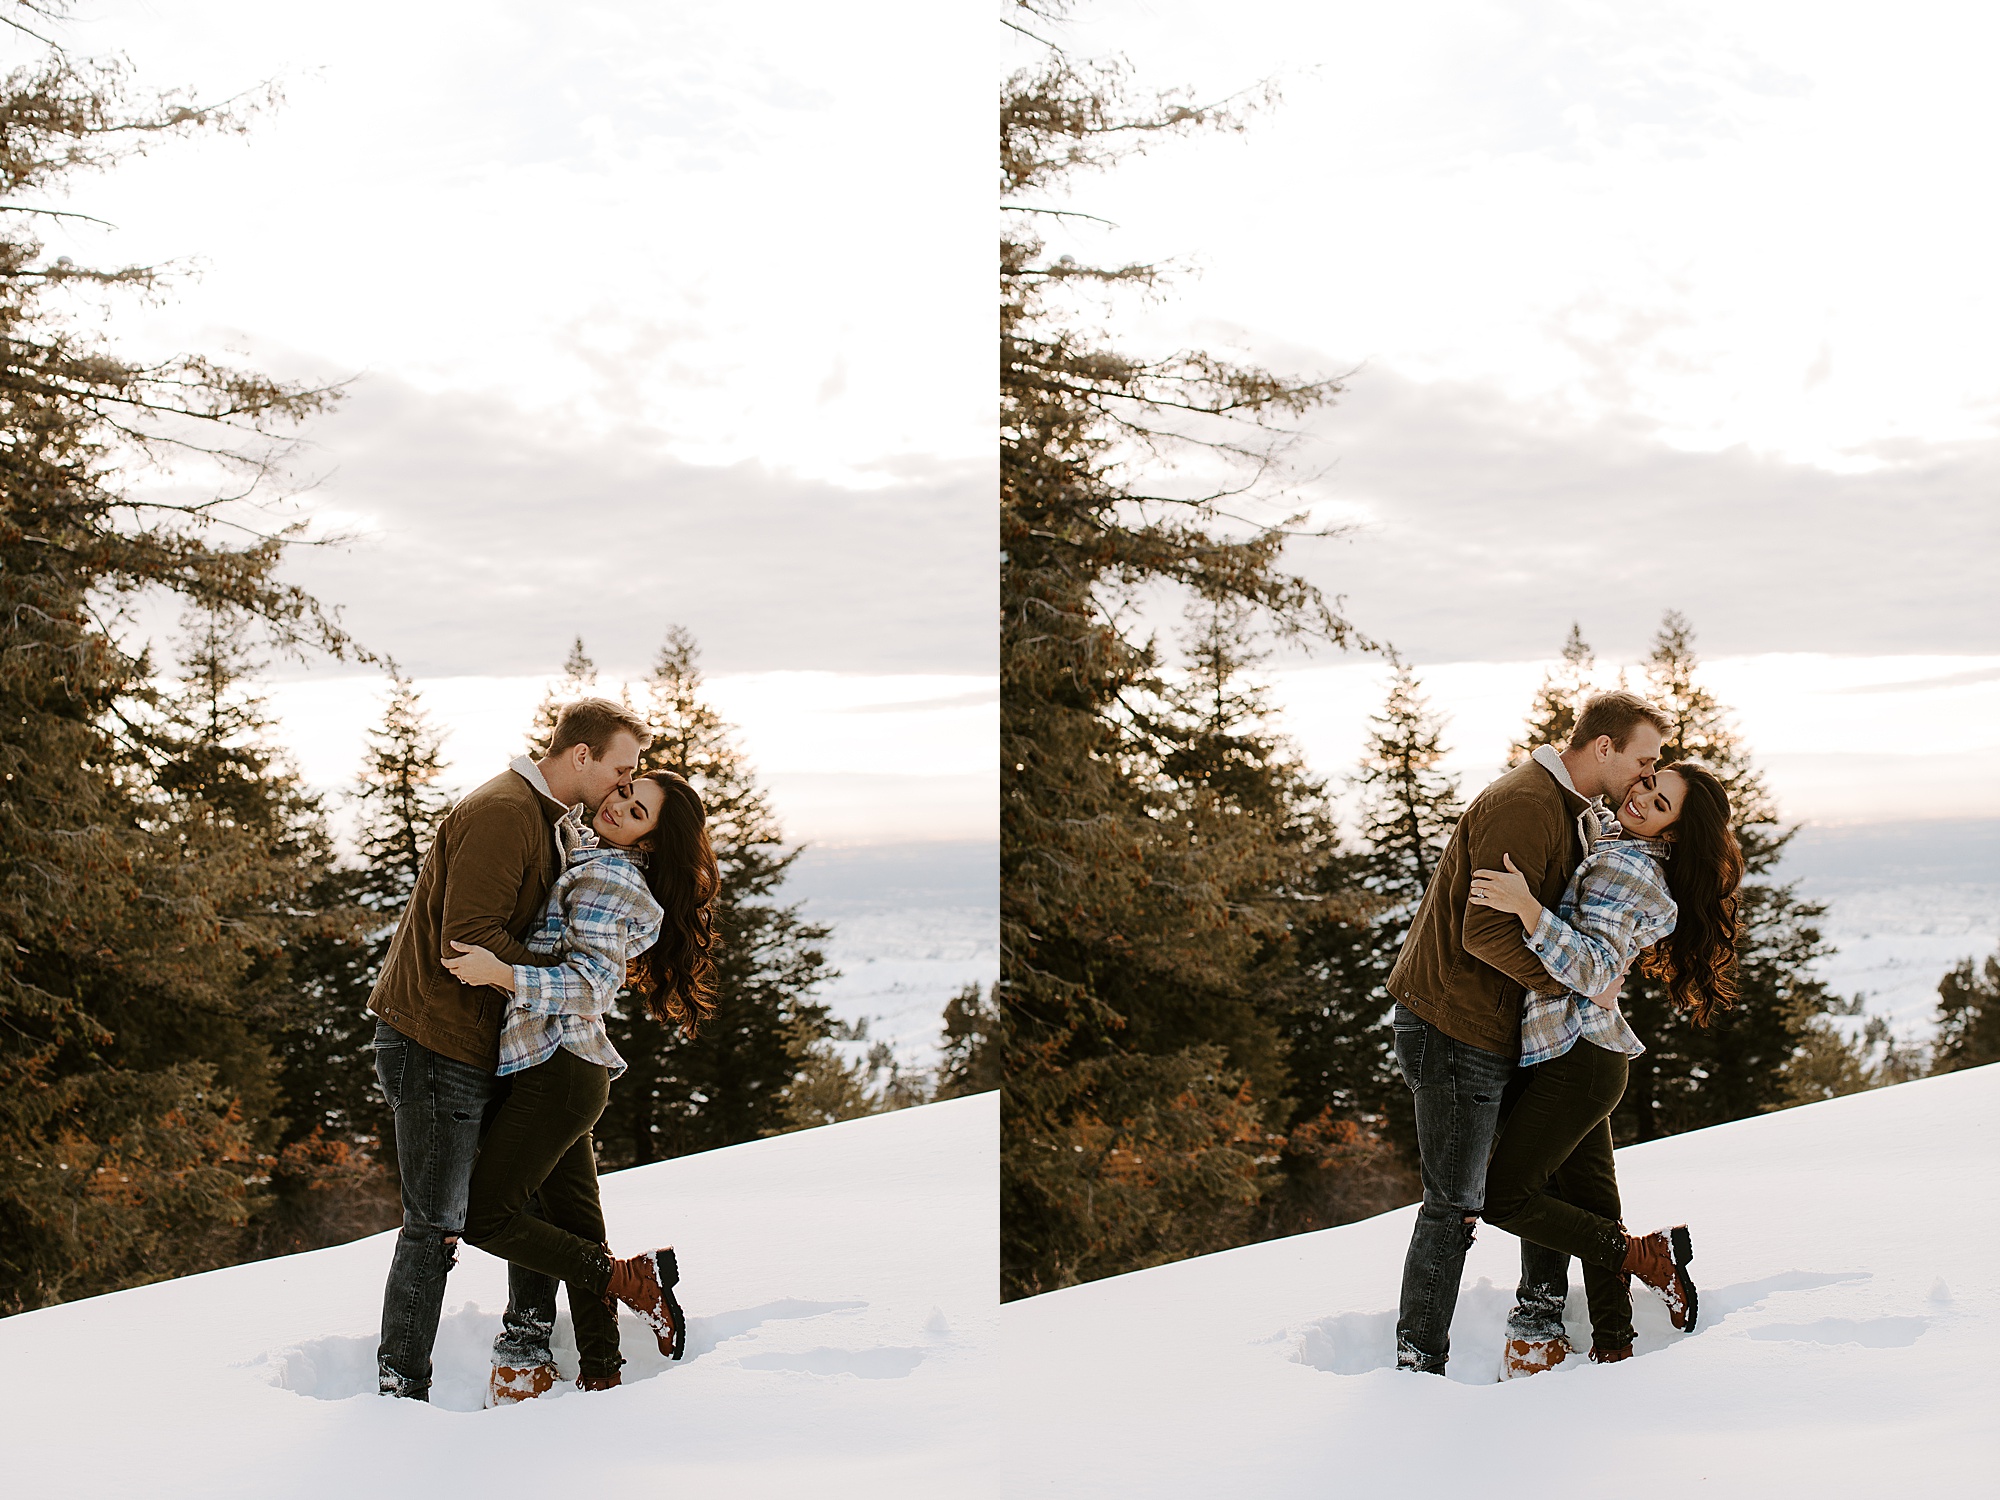 snowy engagement session, snowy engagement photoshoot, snowy couple pictures, snowy couple photos, snowy couple, snowy couple aesthetic, snowy couple photography, snowy mountain couple photos, snowy mountains couple photography, stack rock idaho, sawtooth mountains idaho, sawtooth mountains, sawtooth mountains engagement session, sawtooth mountains engagement photos, boise idaho, boise idaho engagement session, boise engagement session, idaho engagement session, idaho couples session, idaho couples photography, plaid shirt outfits, engagement session, couples session, couples photoshoot, couples photography, couples photoshoot outfit ideas, couples photoshoot outfits, couple photos, couple photography, engagement photoshoot ideas